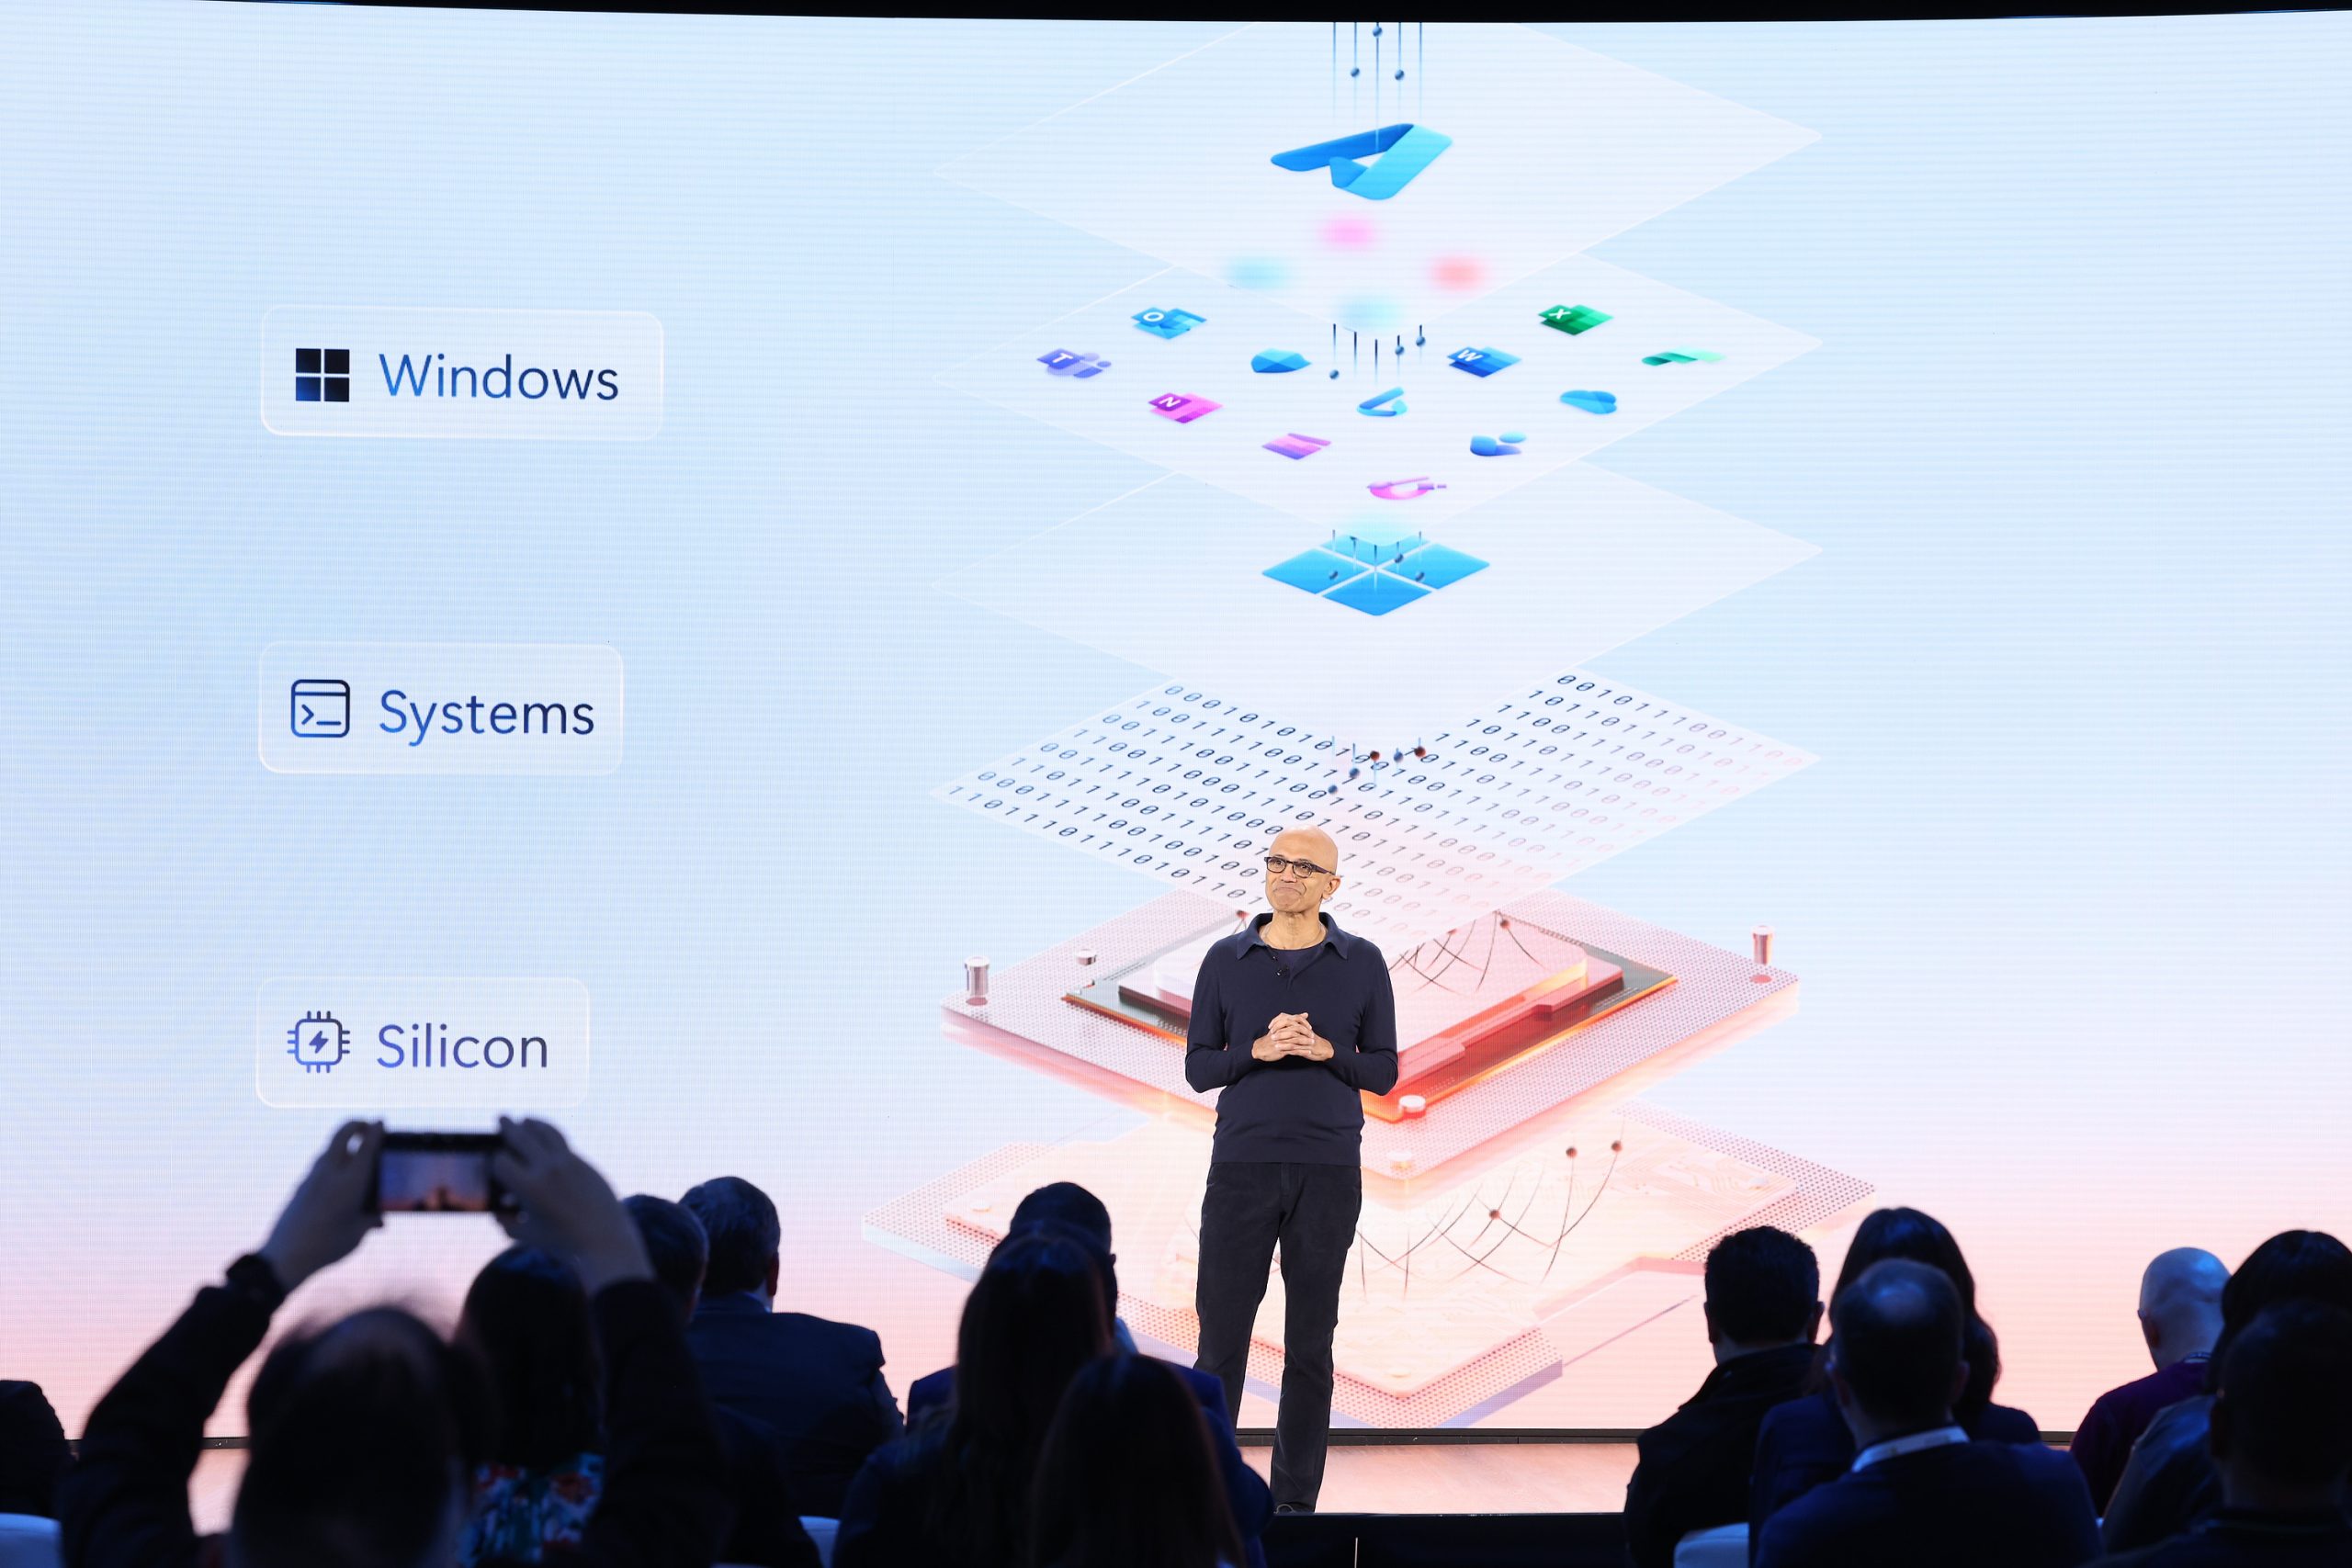 A man stands on a stage in front of an audience next to icons that denote Windows, Systems and Silicon